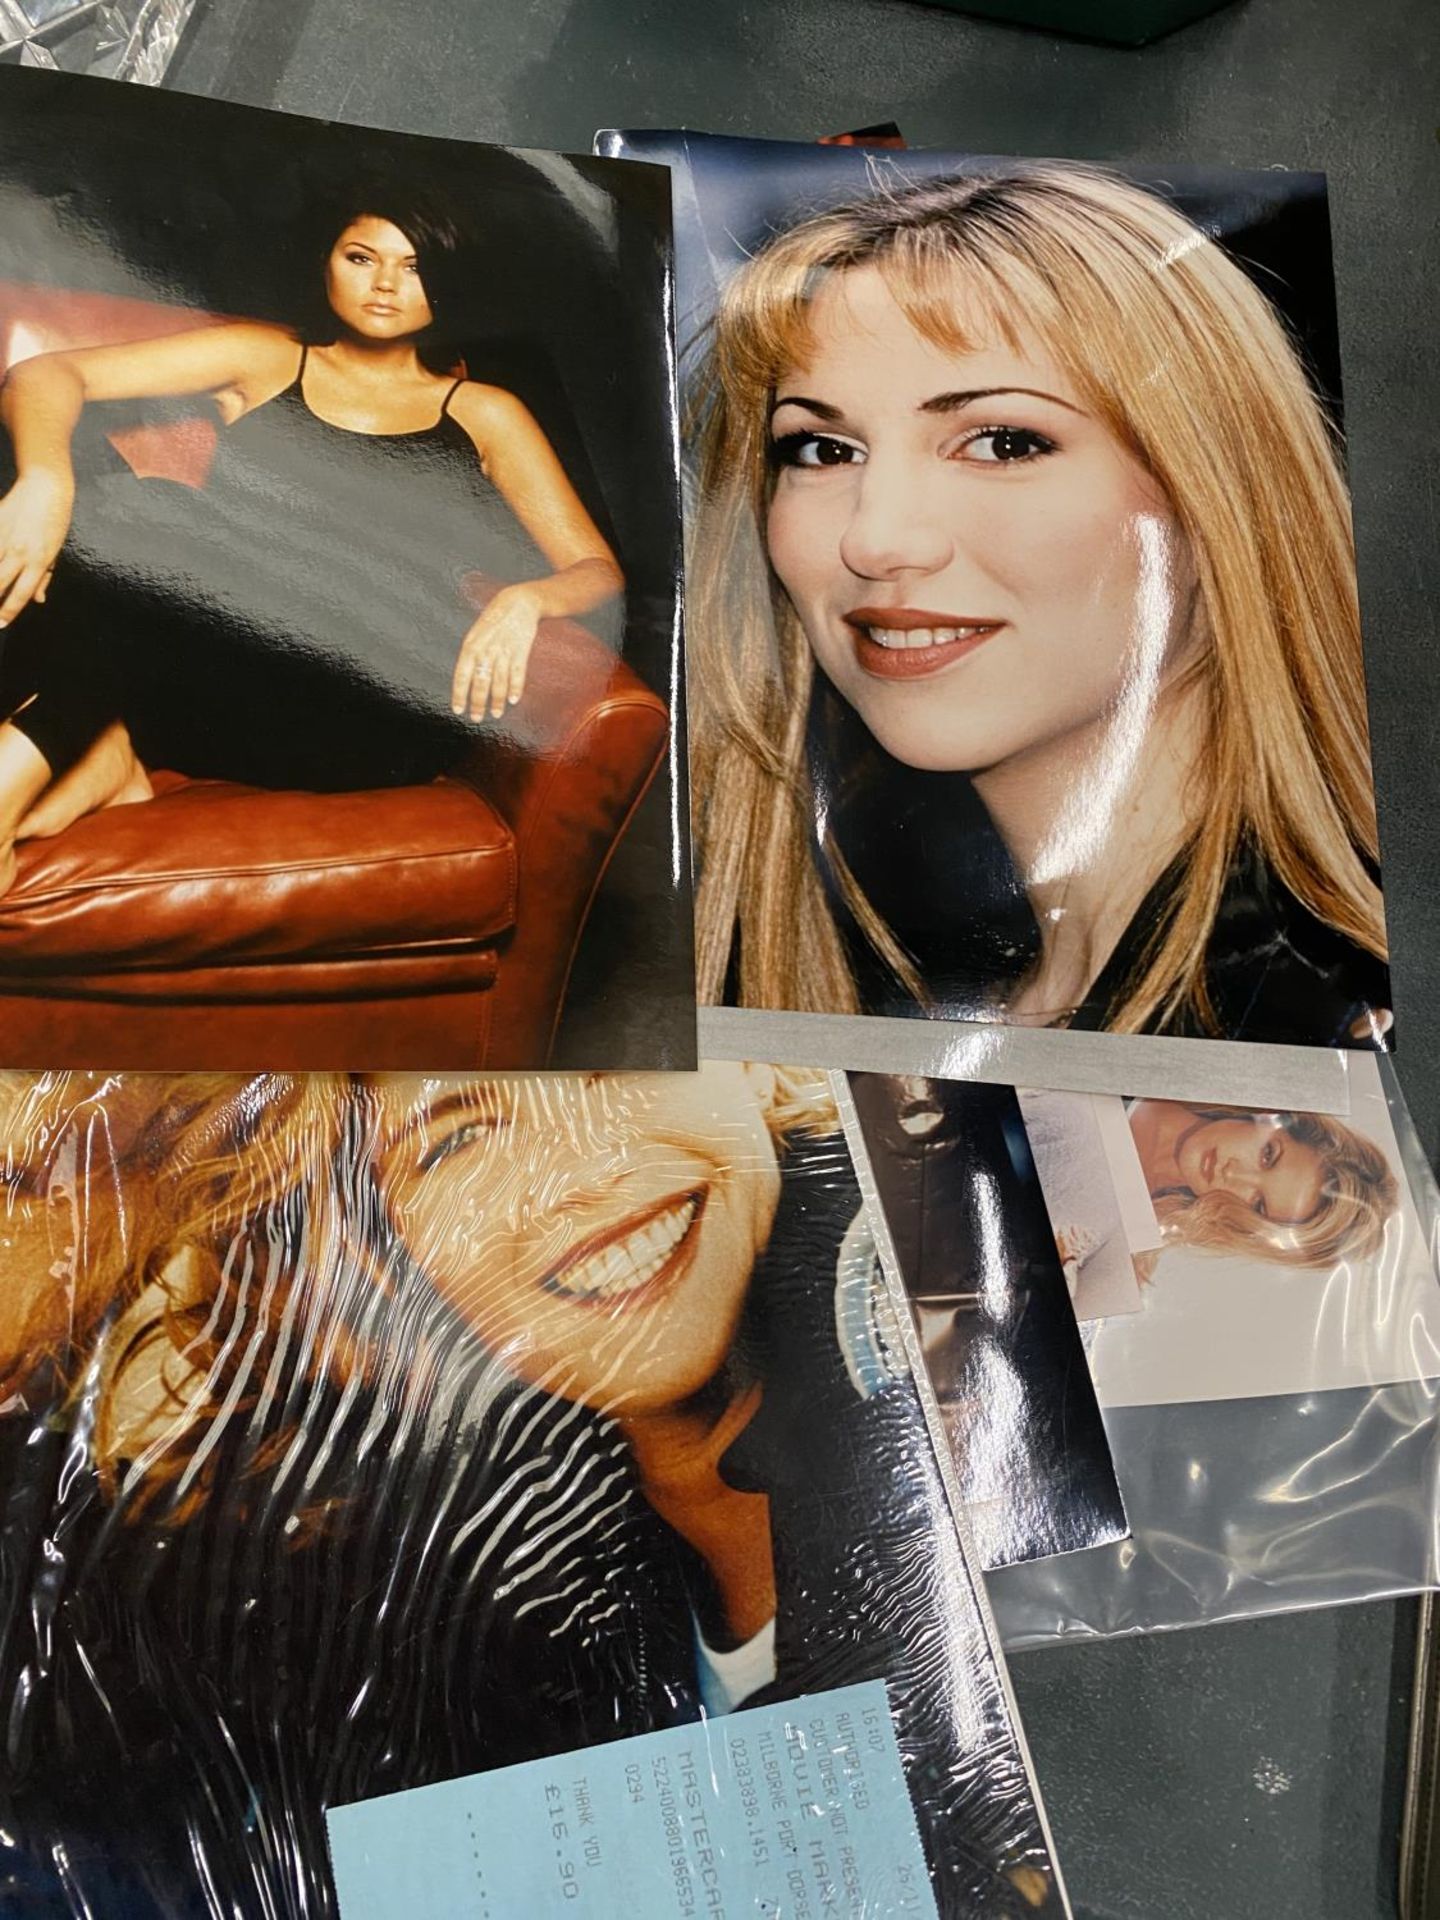 A COLLECTION OF PHOTOGRAPHS OF US AND GB FEMALE ACTRESSES AND POP STARS - Image 2 of 2